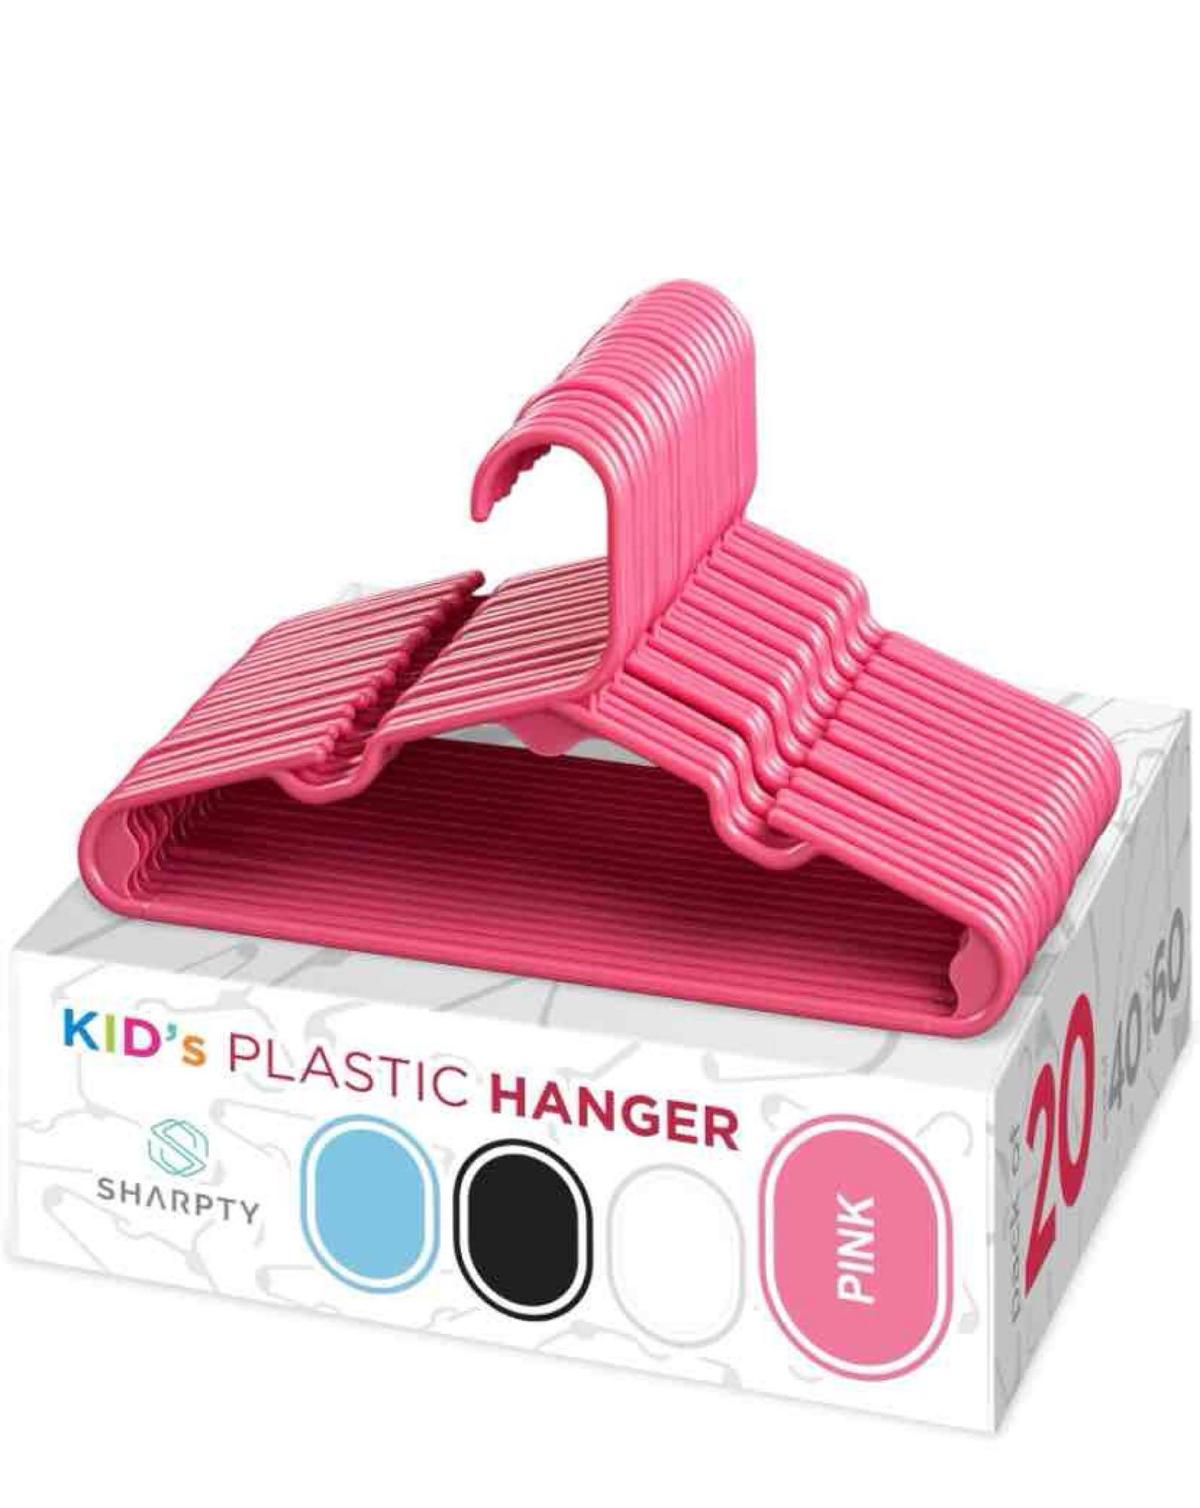 100 pack Sharpty Kids Plastic Hangers, Children's Hangers for Baby, Toddler, and Child Clothes -